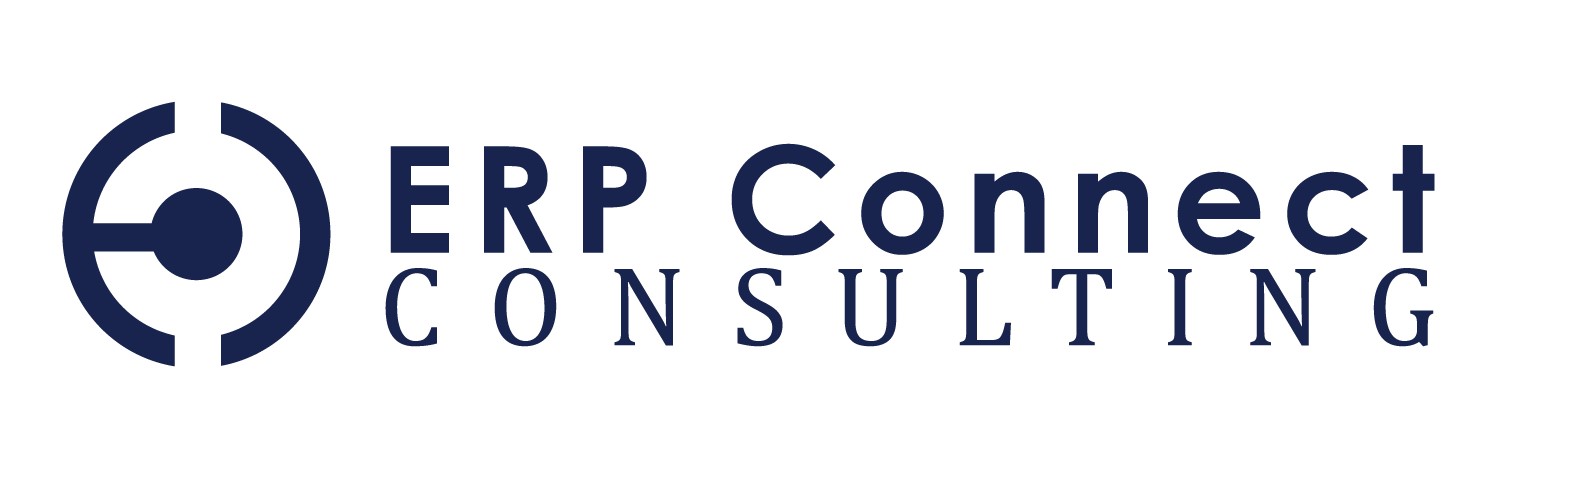 ERP Connect Consulting